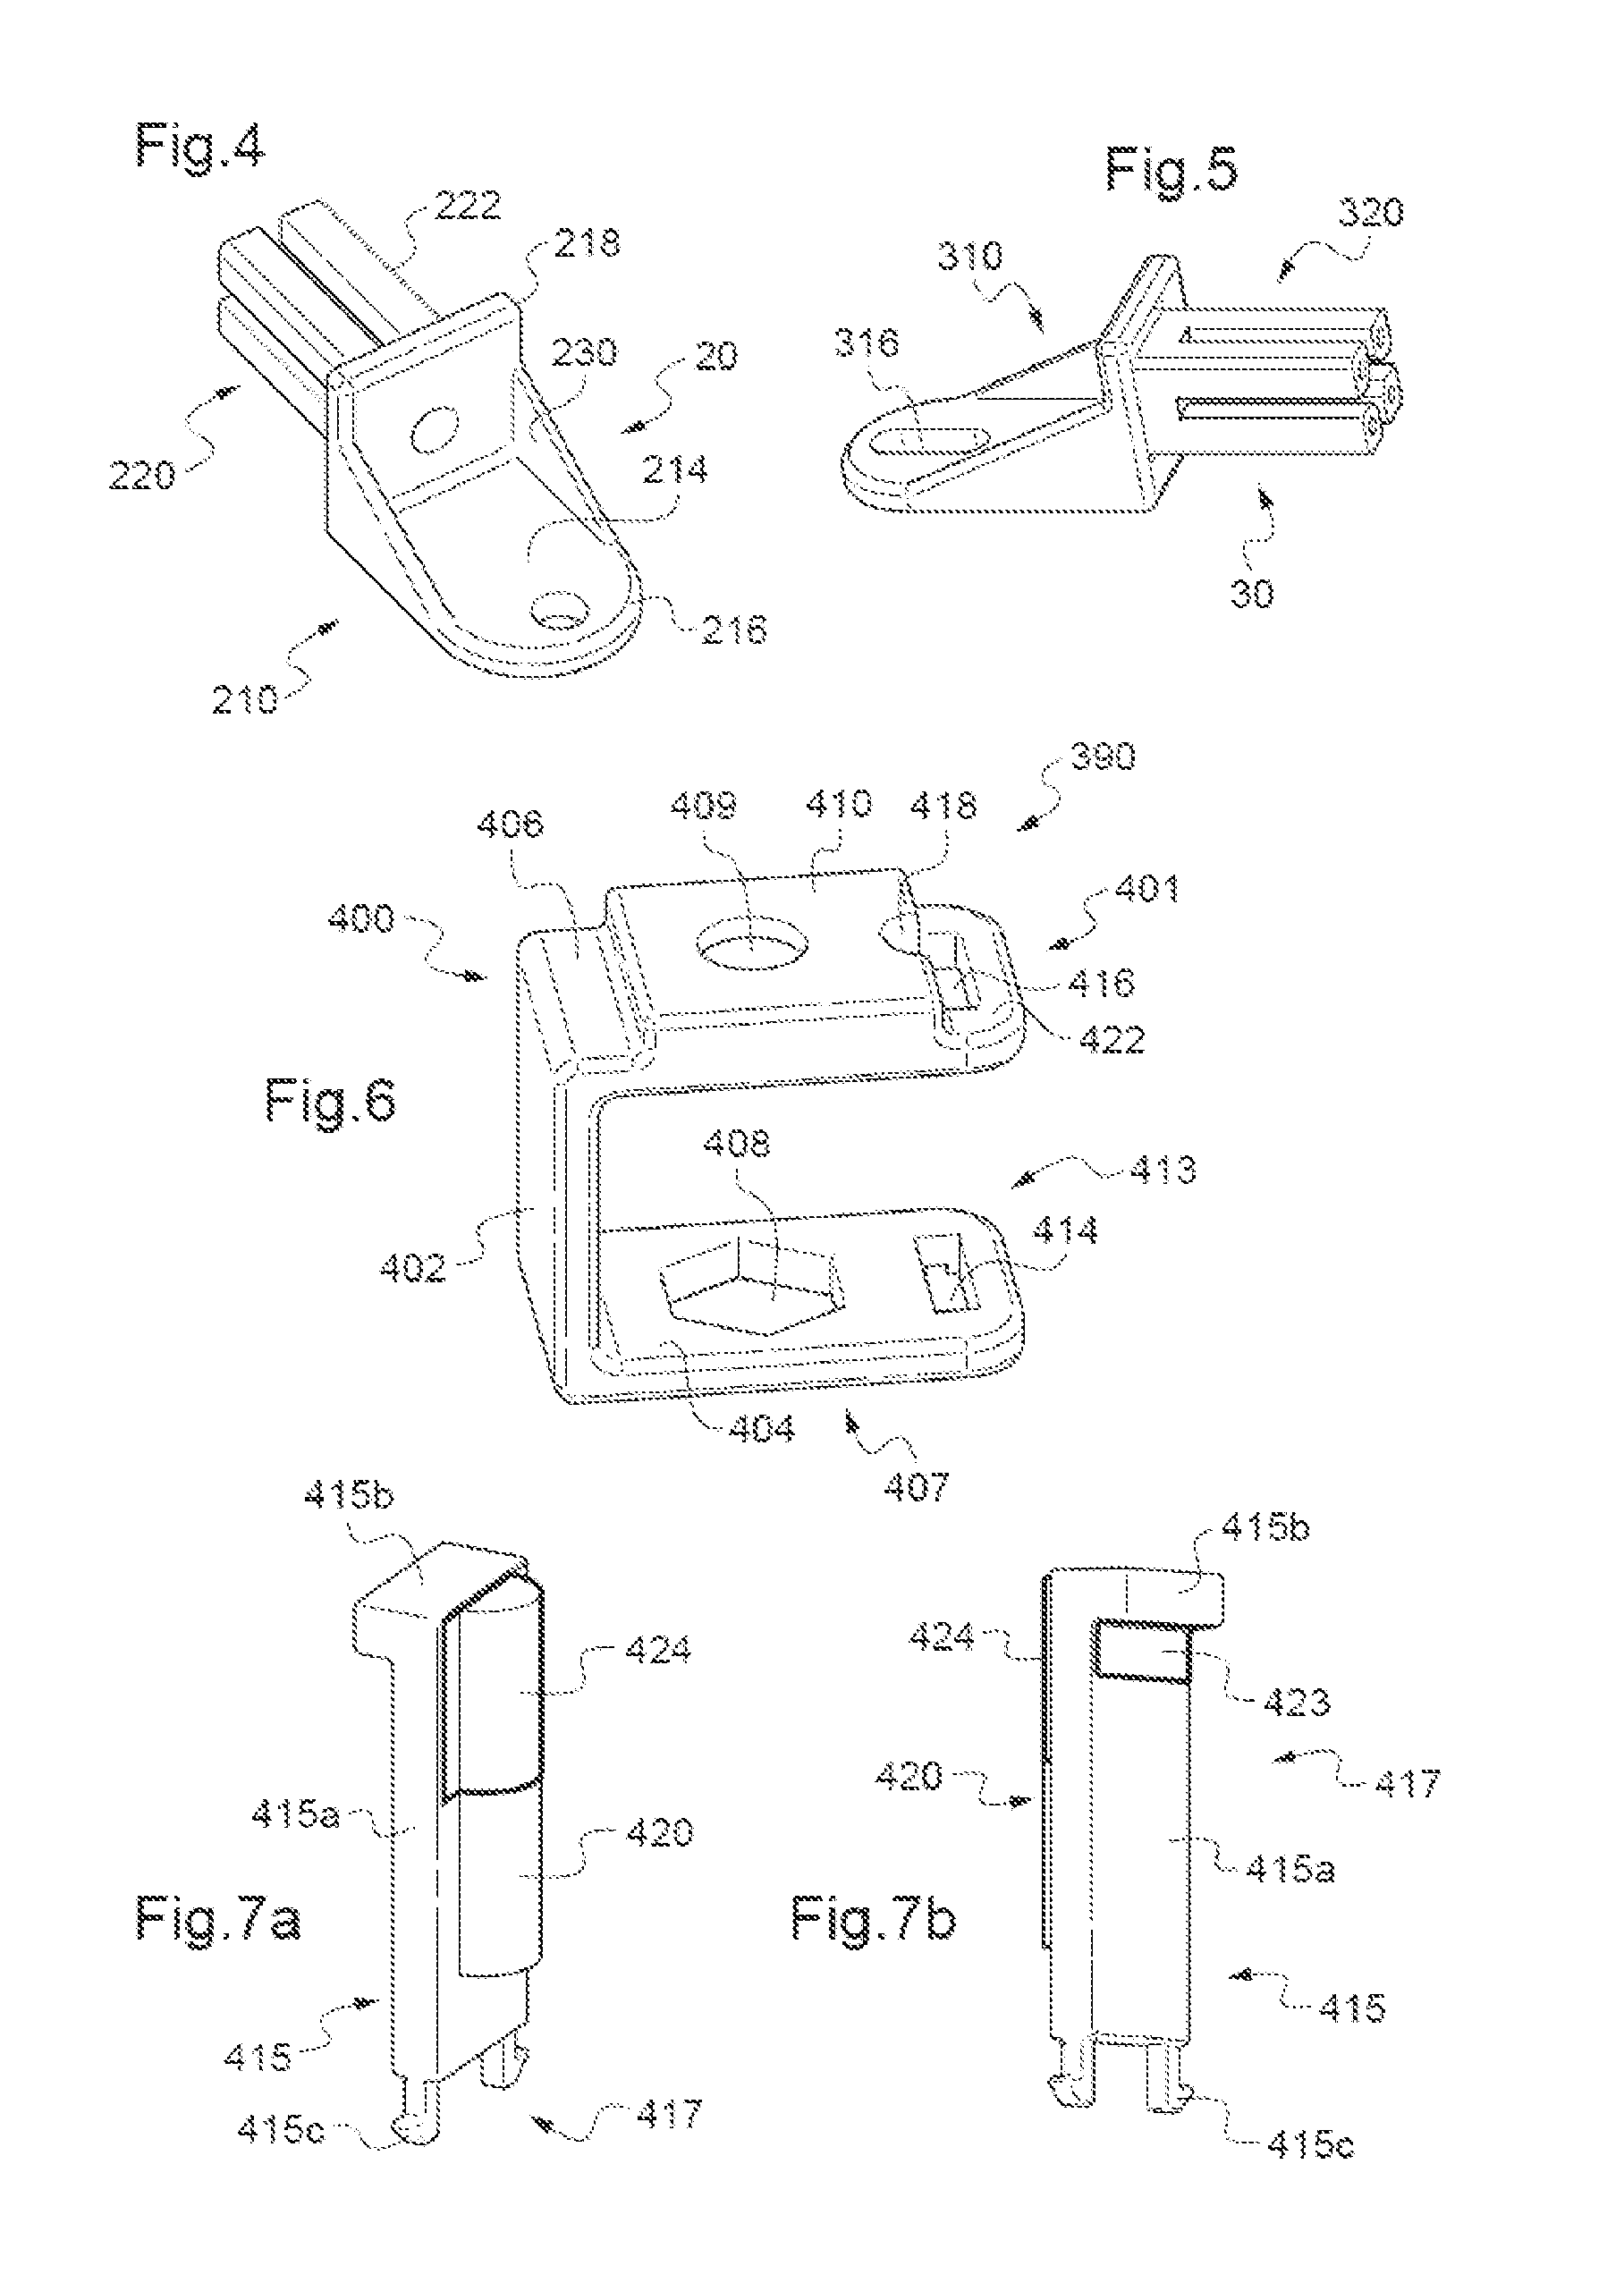 Mounting device for aircraft supply systems